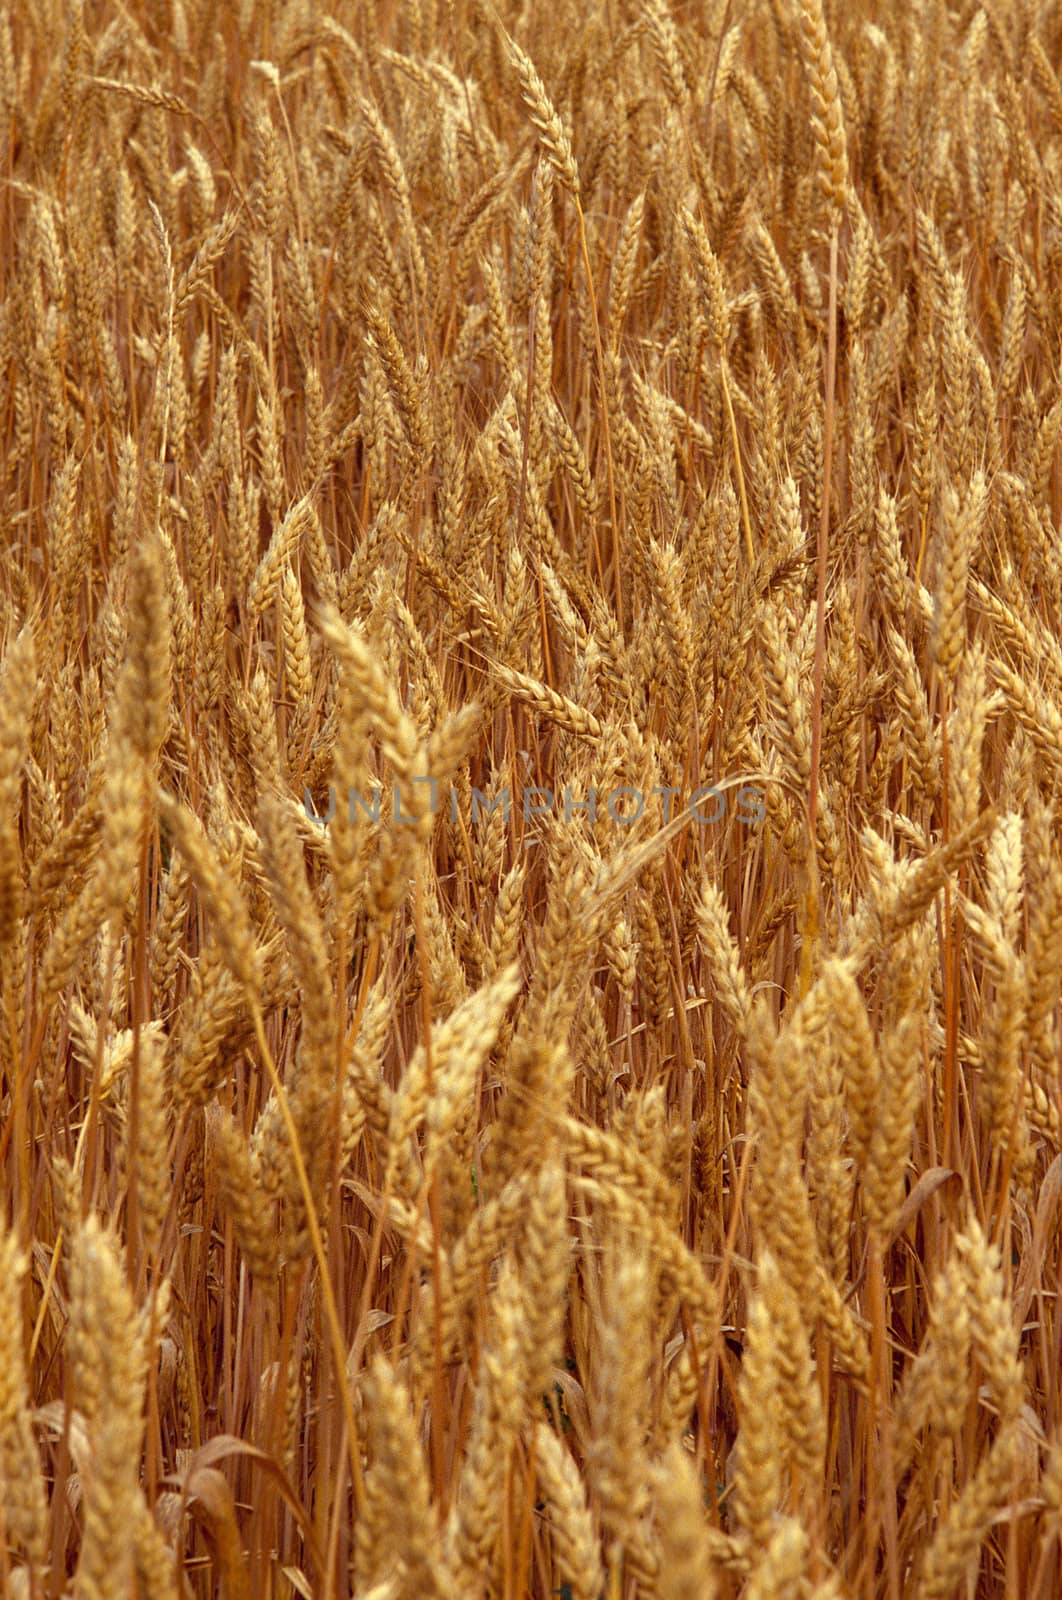 Tight shot of a wheat field